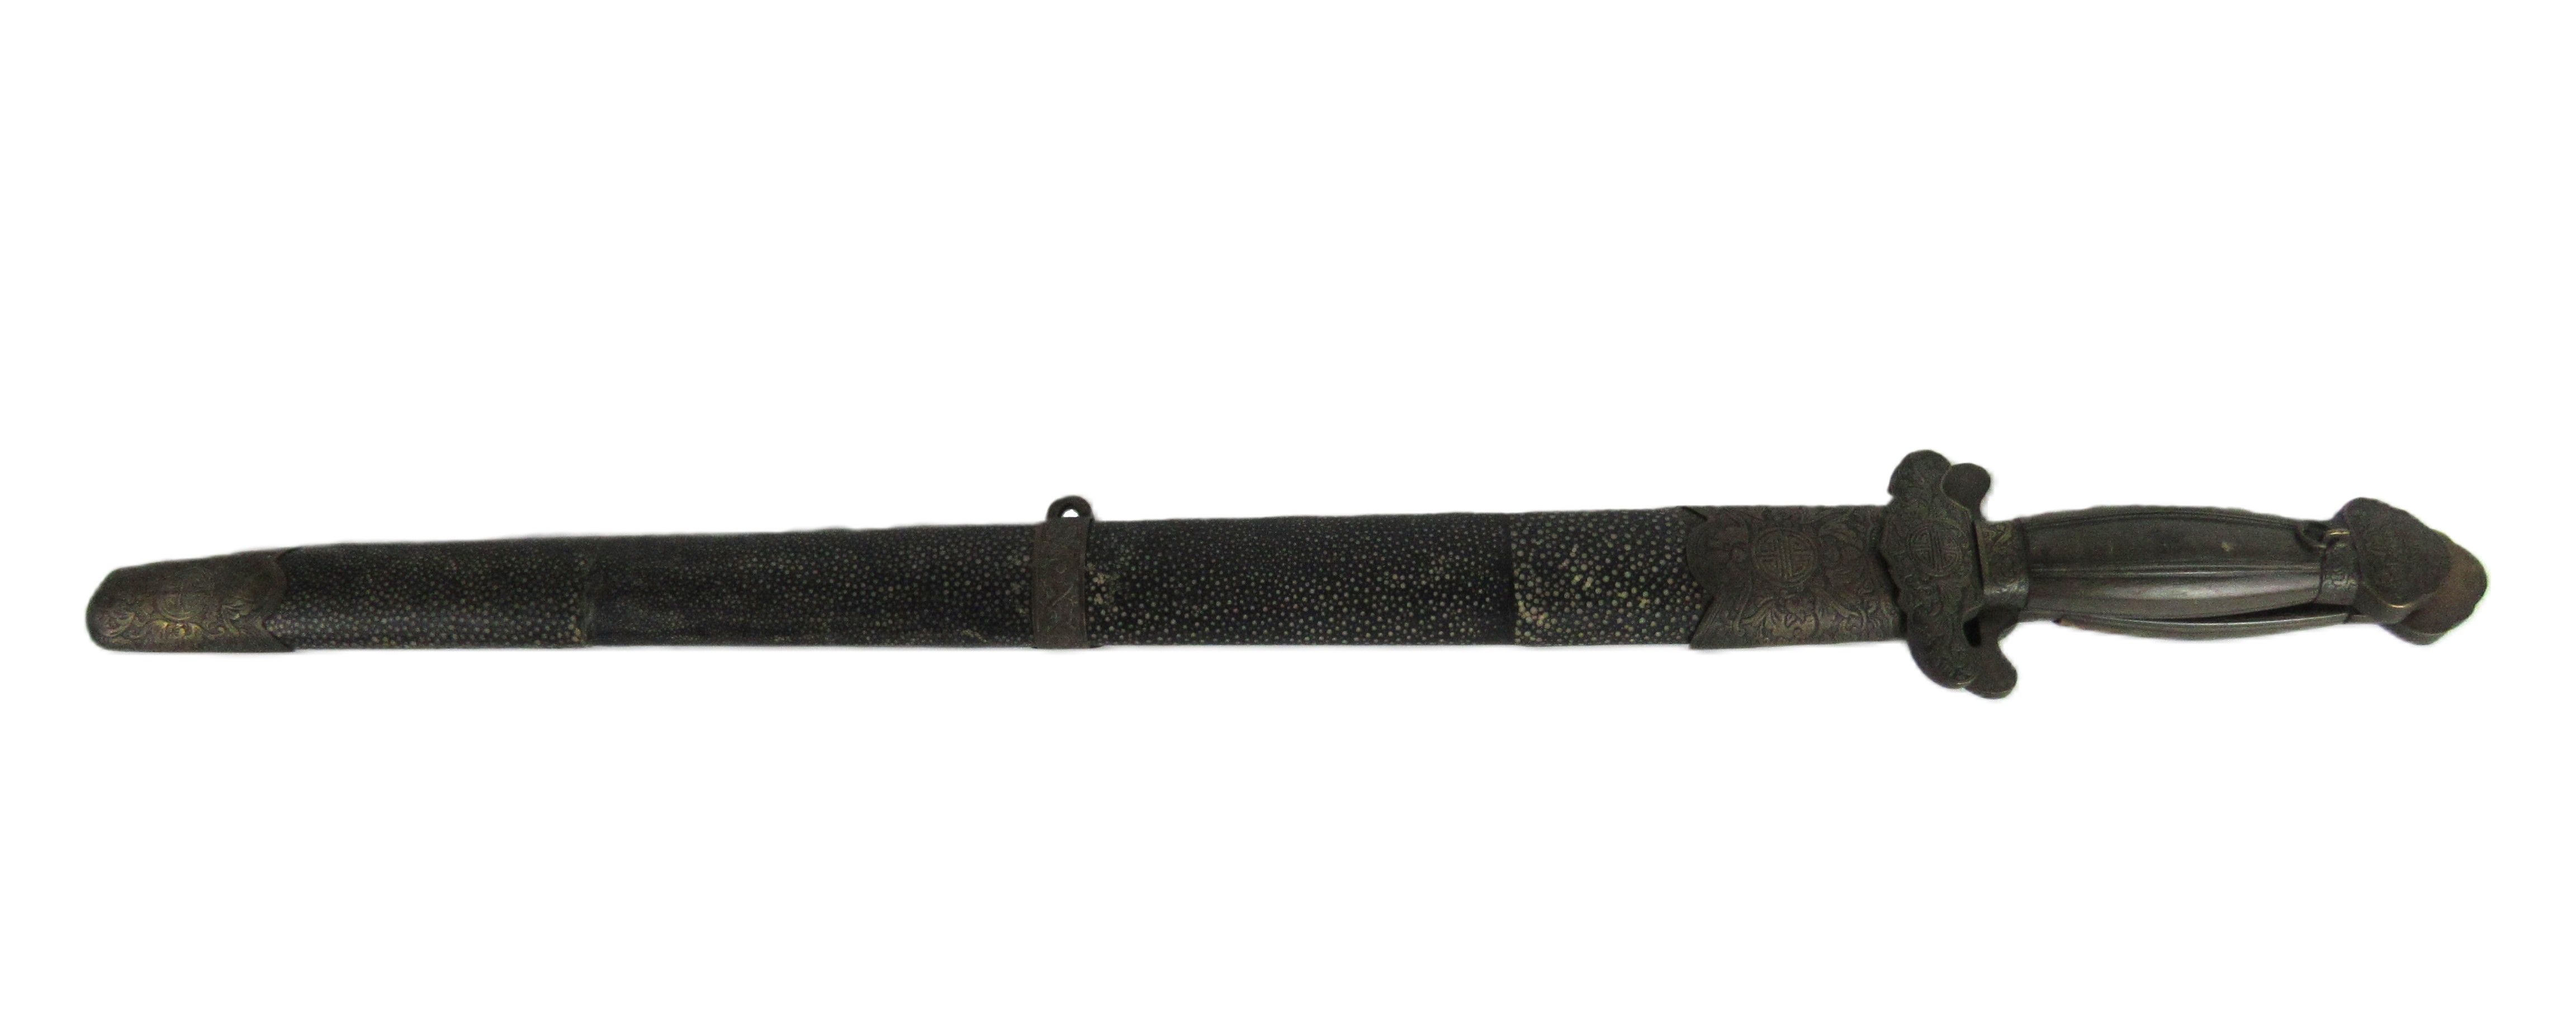 Militaria: A 19th Century Chinese double 'Shuang Jian' Sword, the shaped half handles with